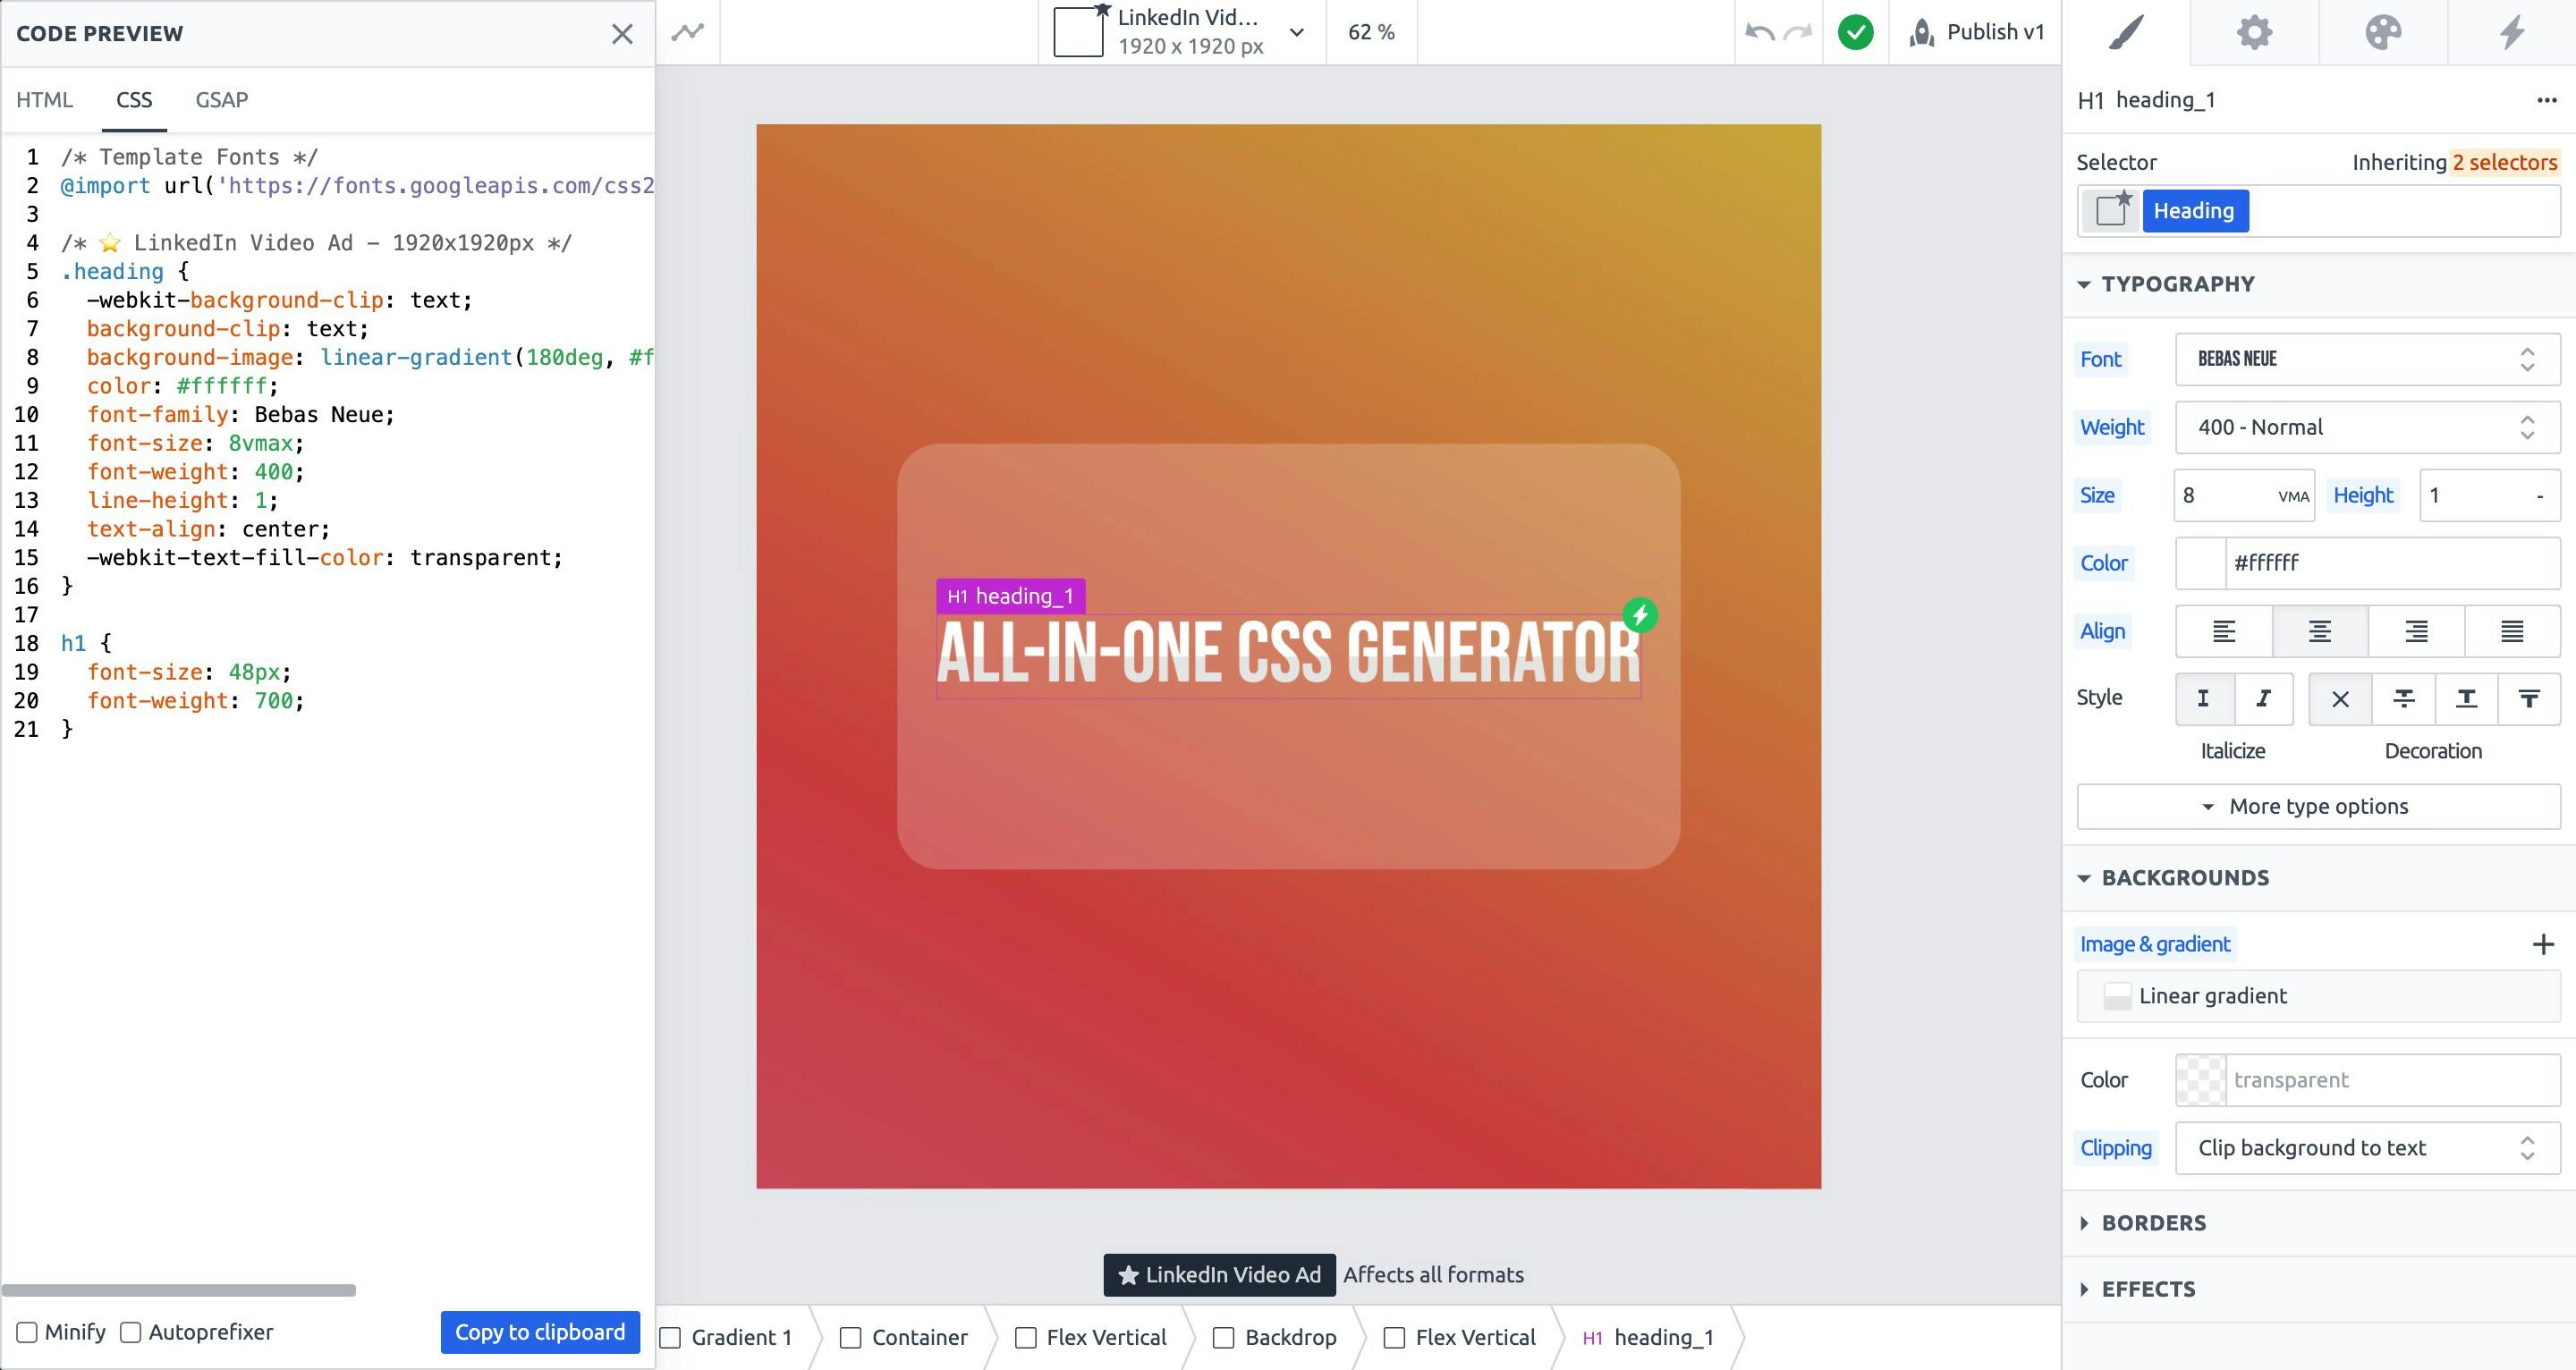 All-in-One CSS Generator